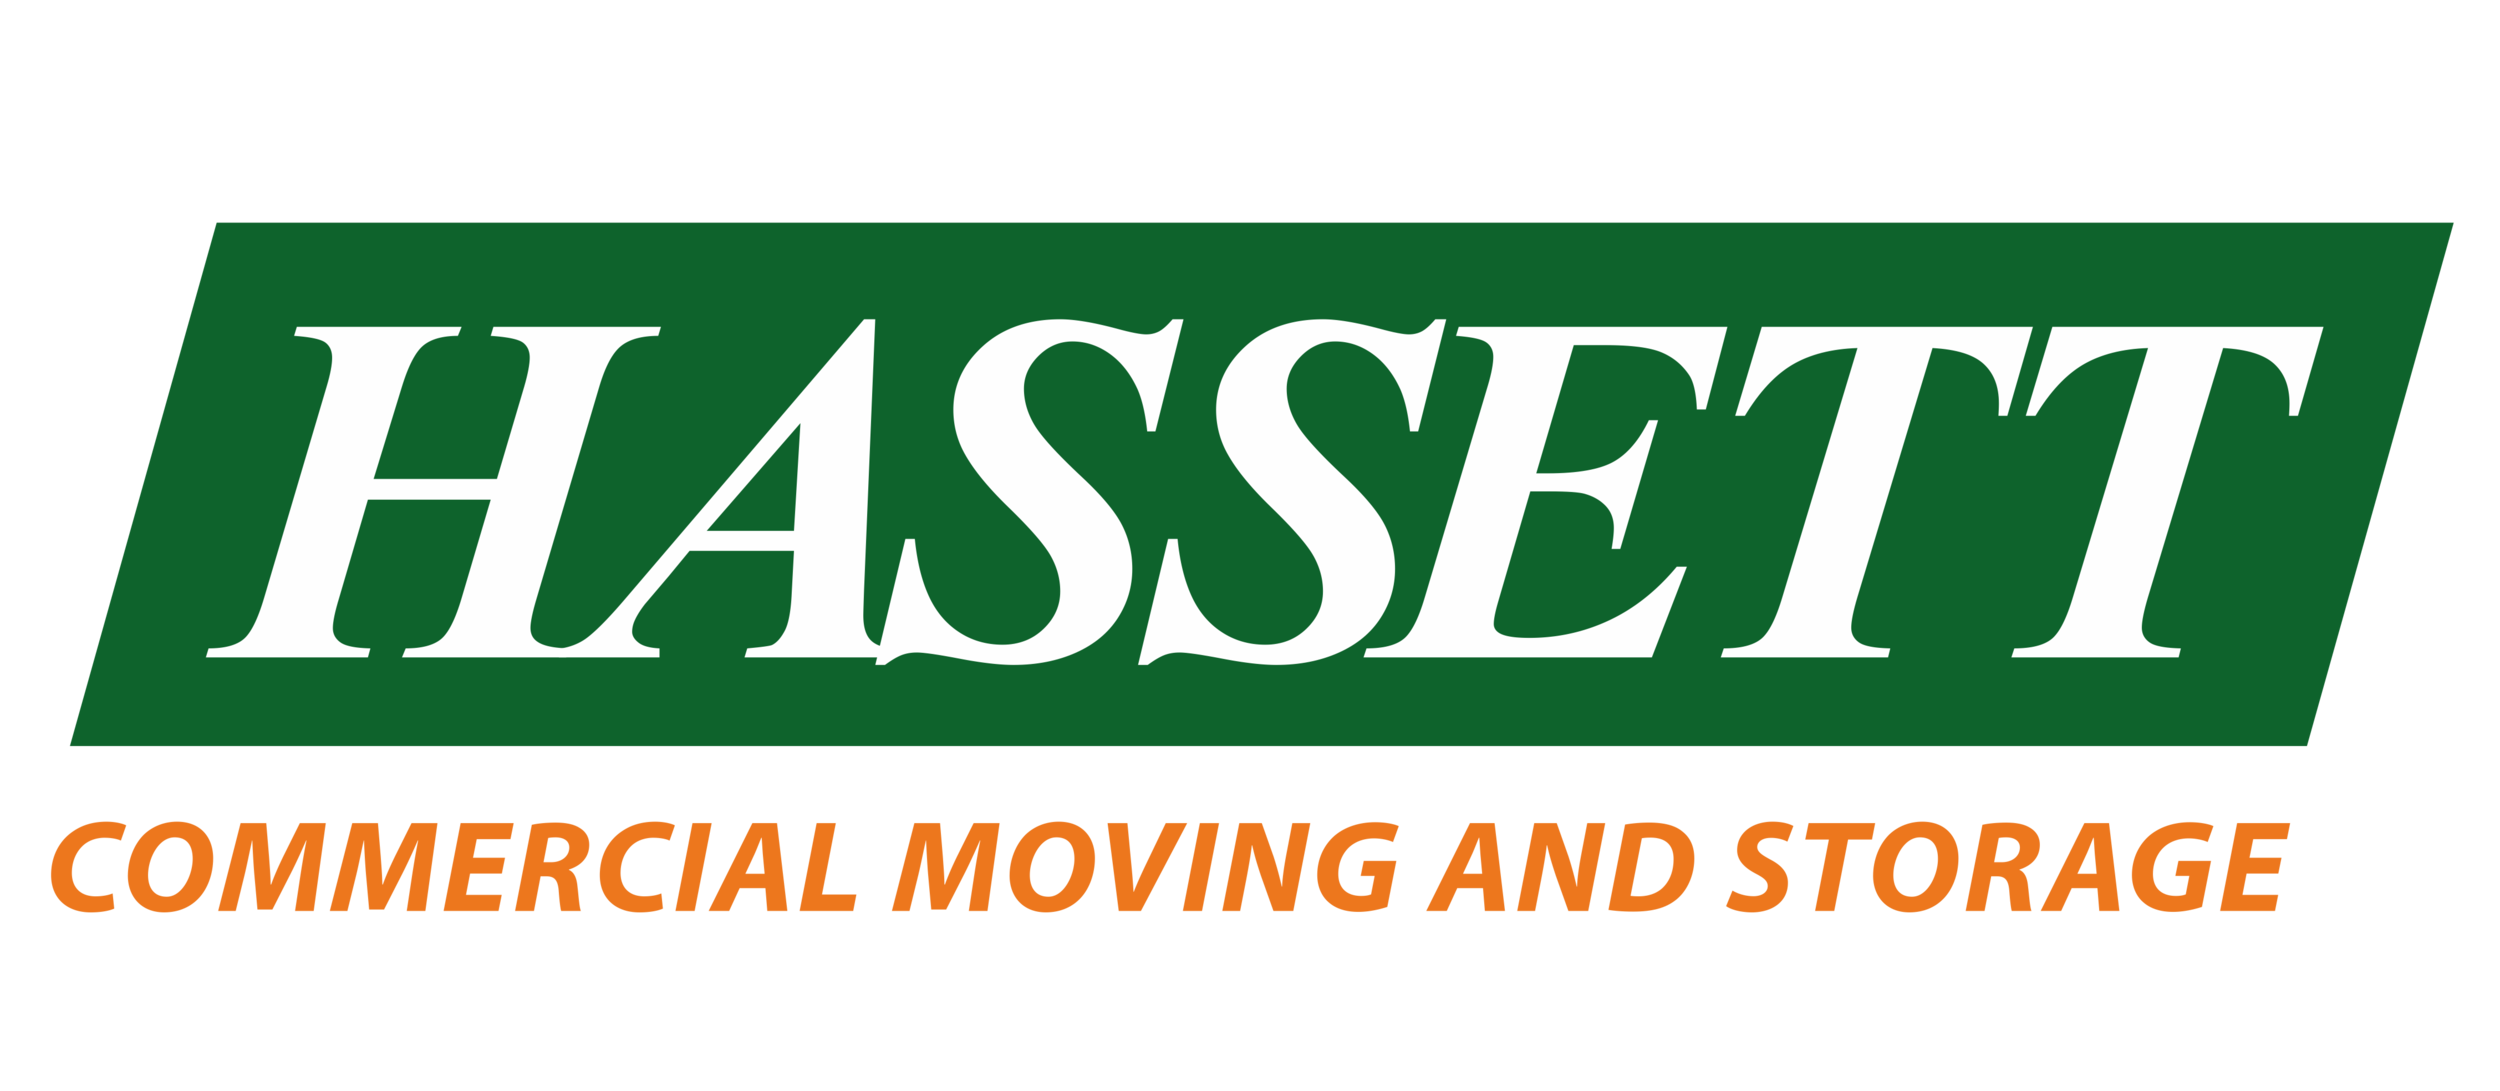 Hasset Commercial Moving and Storage